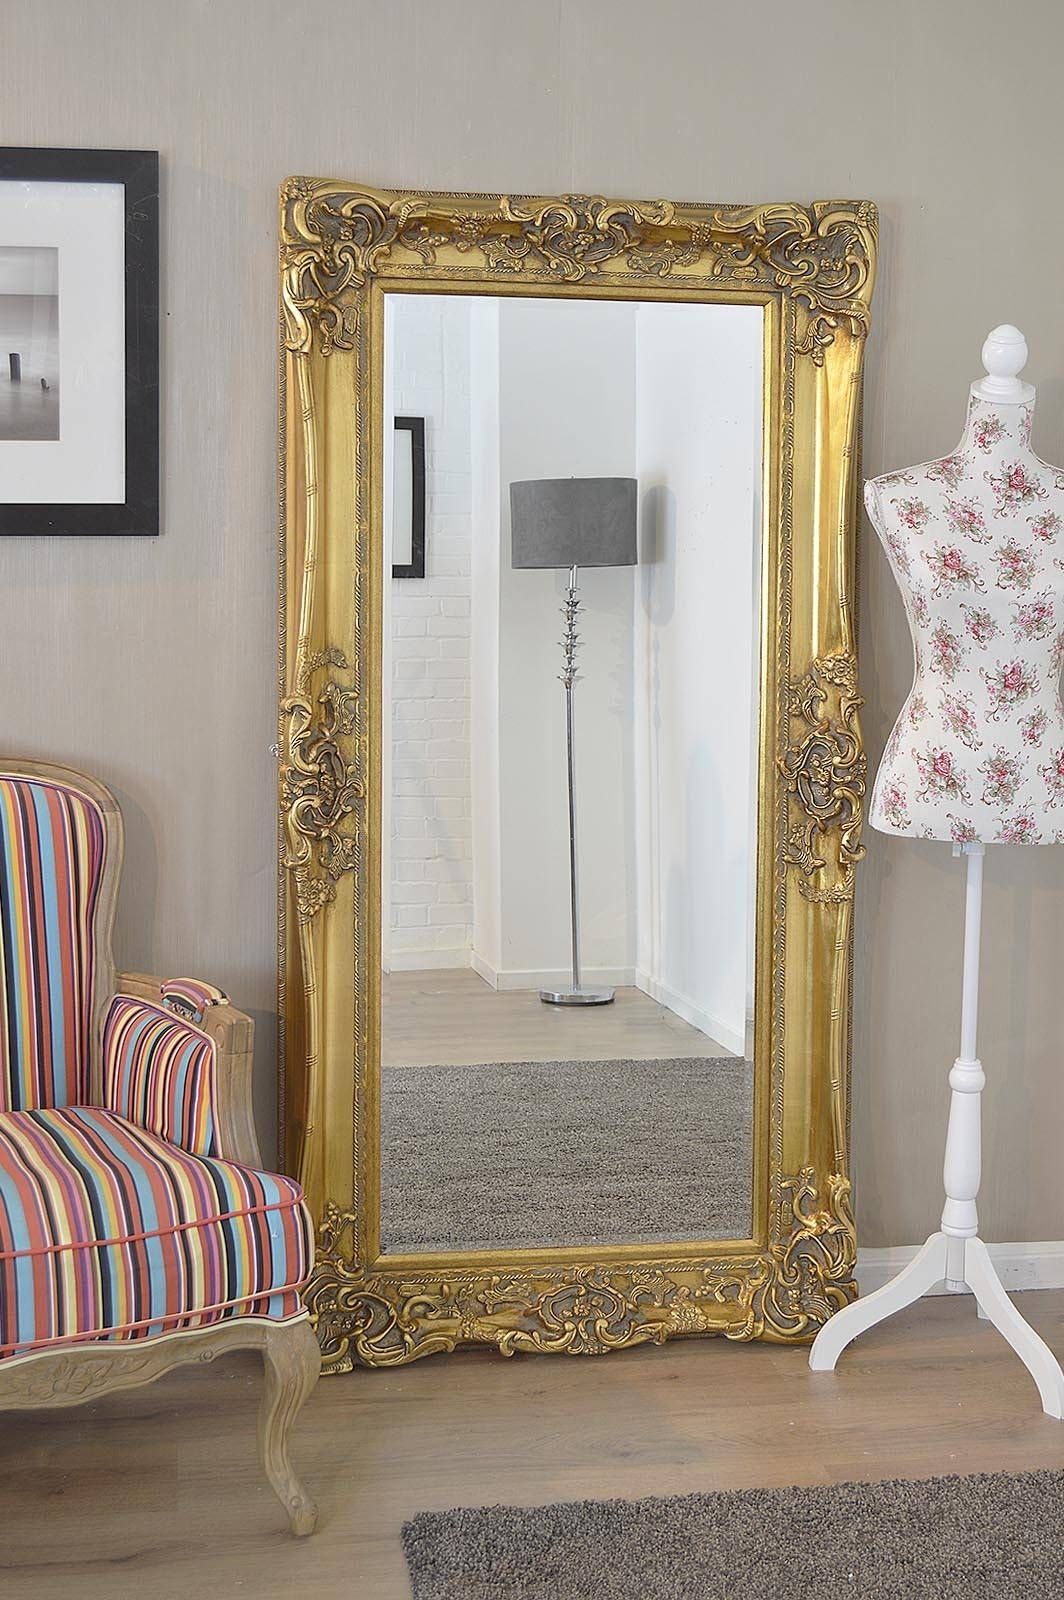 Magnificent Vintage Stand Up Mirror With Frameless Vintage Mirror Throughout Huge Ornate Mirrors (View 8 of 15)